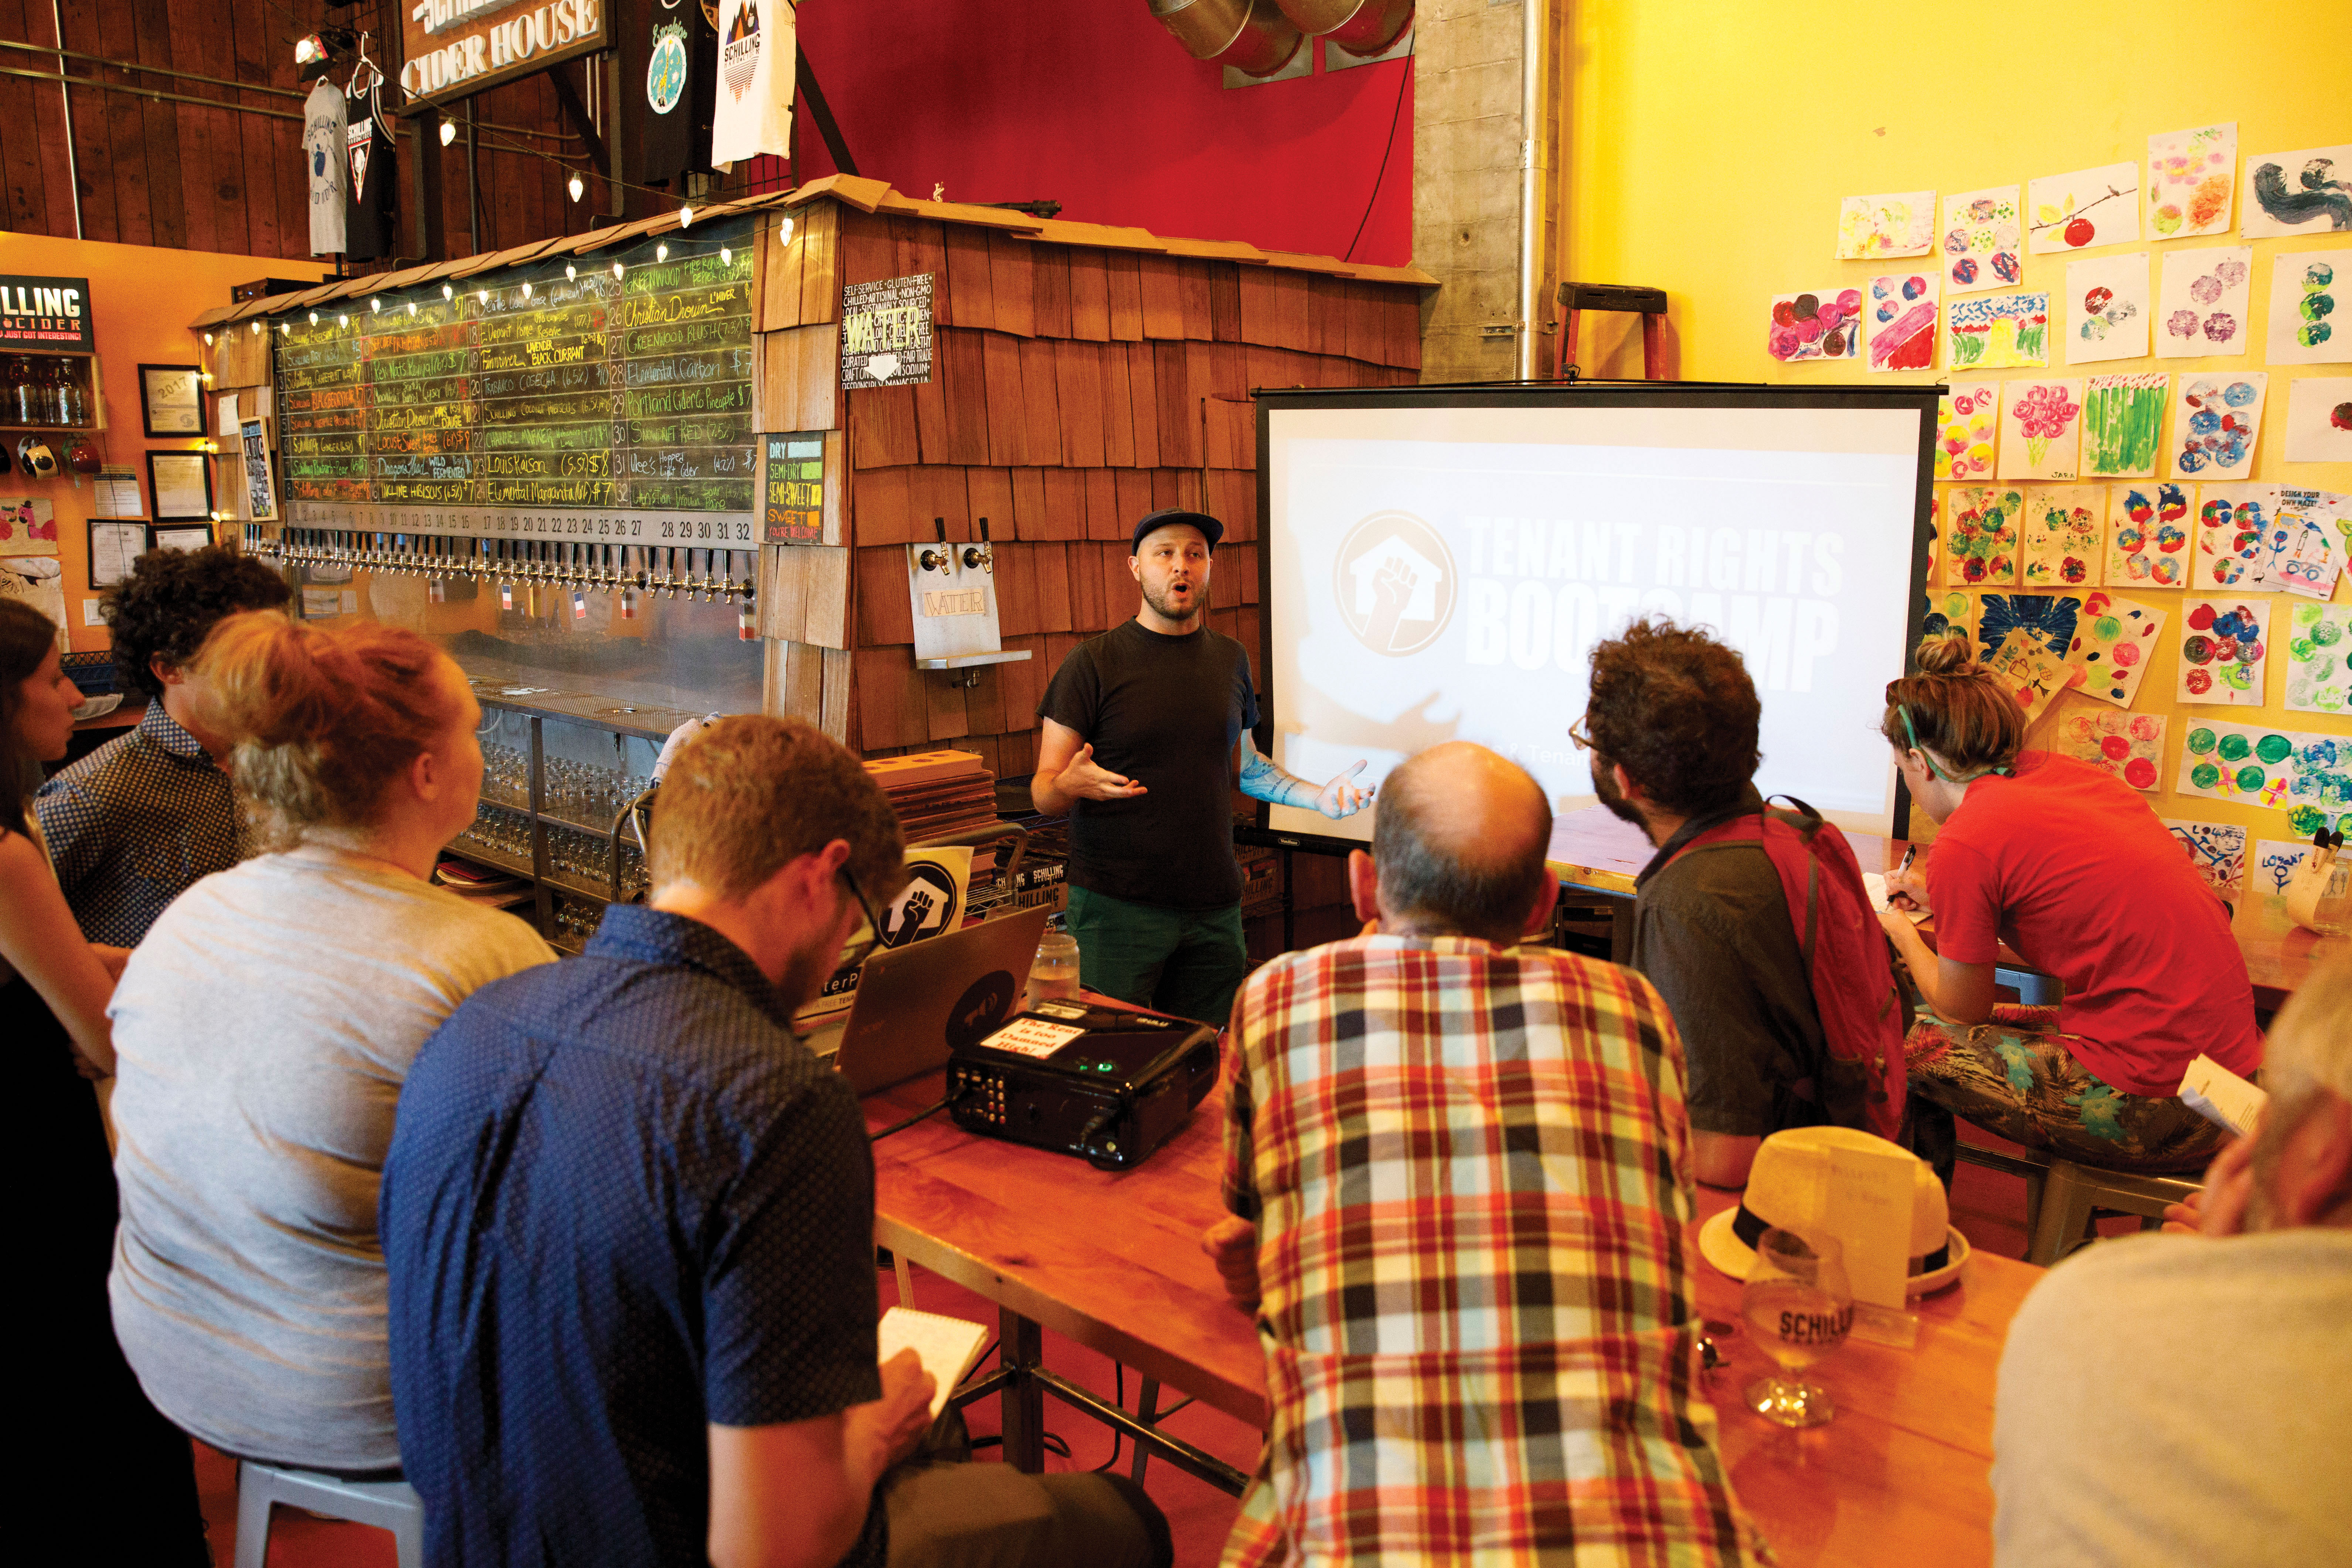 Devin Silvernail, center, leads a Tenant Rights Bootcamp on Wednesday, July 25, 2018 at Schilling Cider House in Fremont, Seattle, WA. The event was hosted by Be:Seattle and provided information on Seattle tenants rights. (Sarah Hoffman/Crosscut)